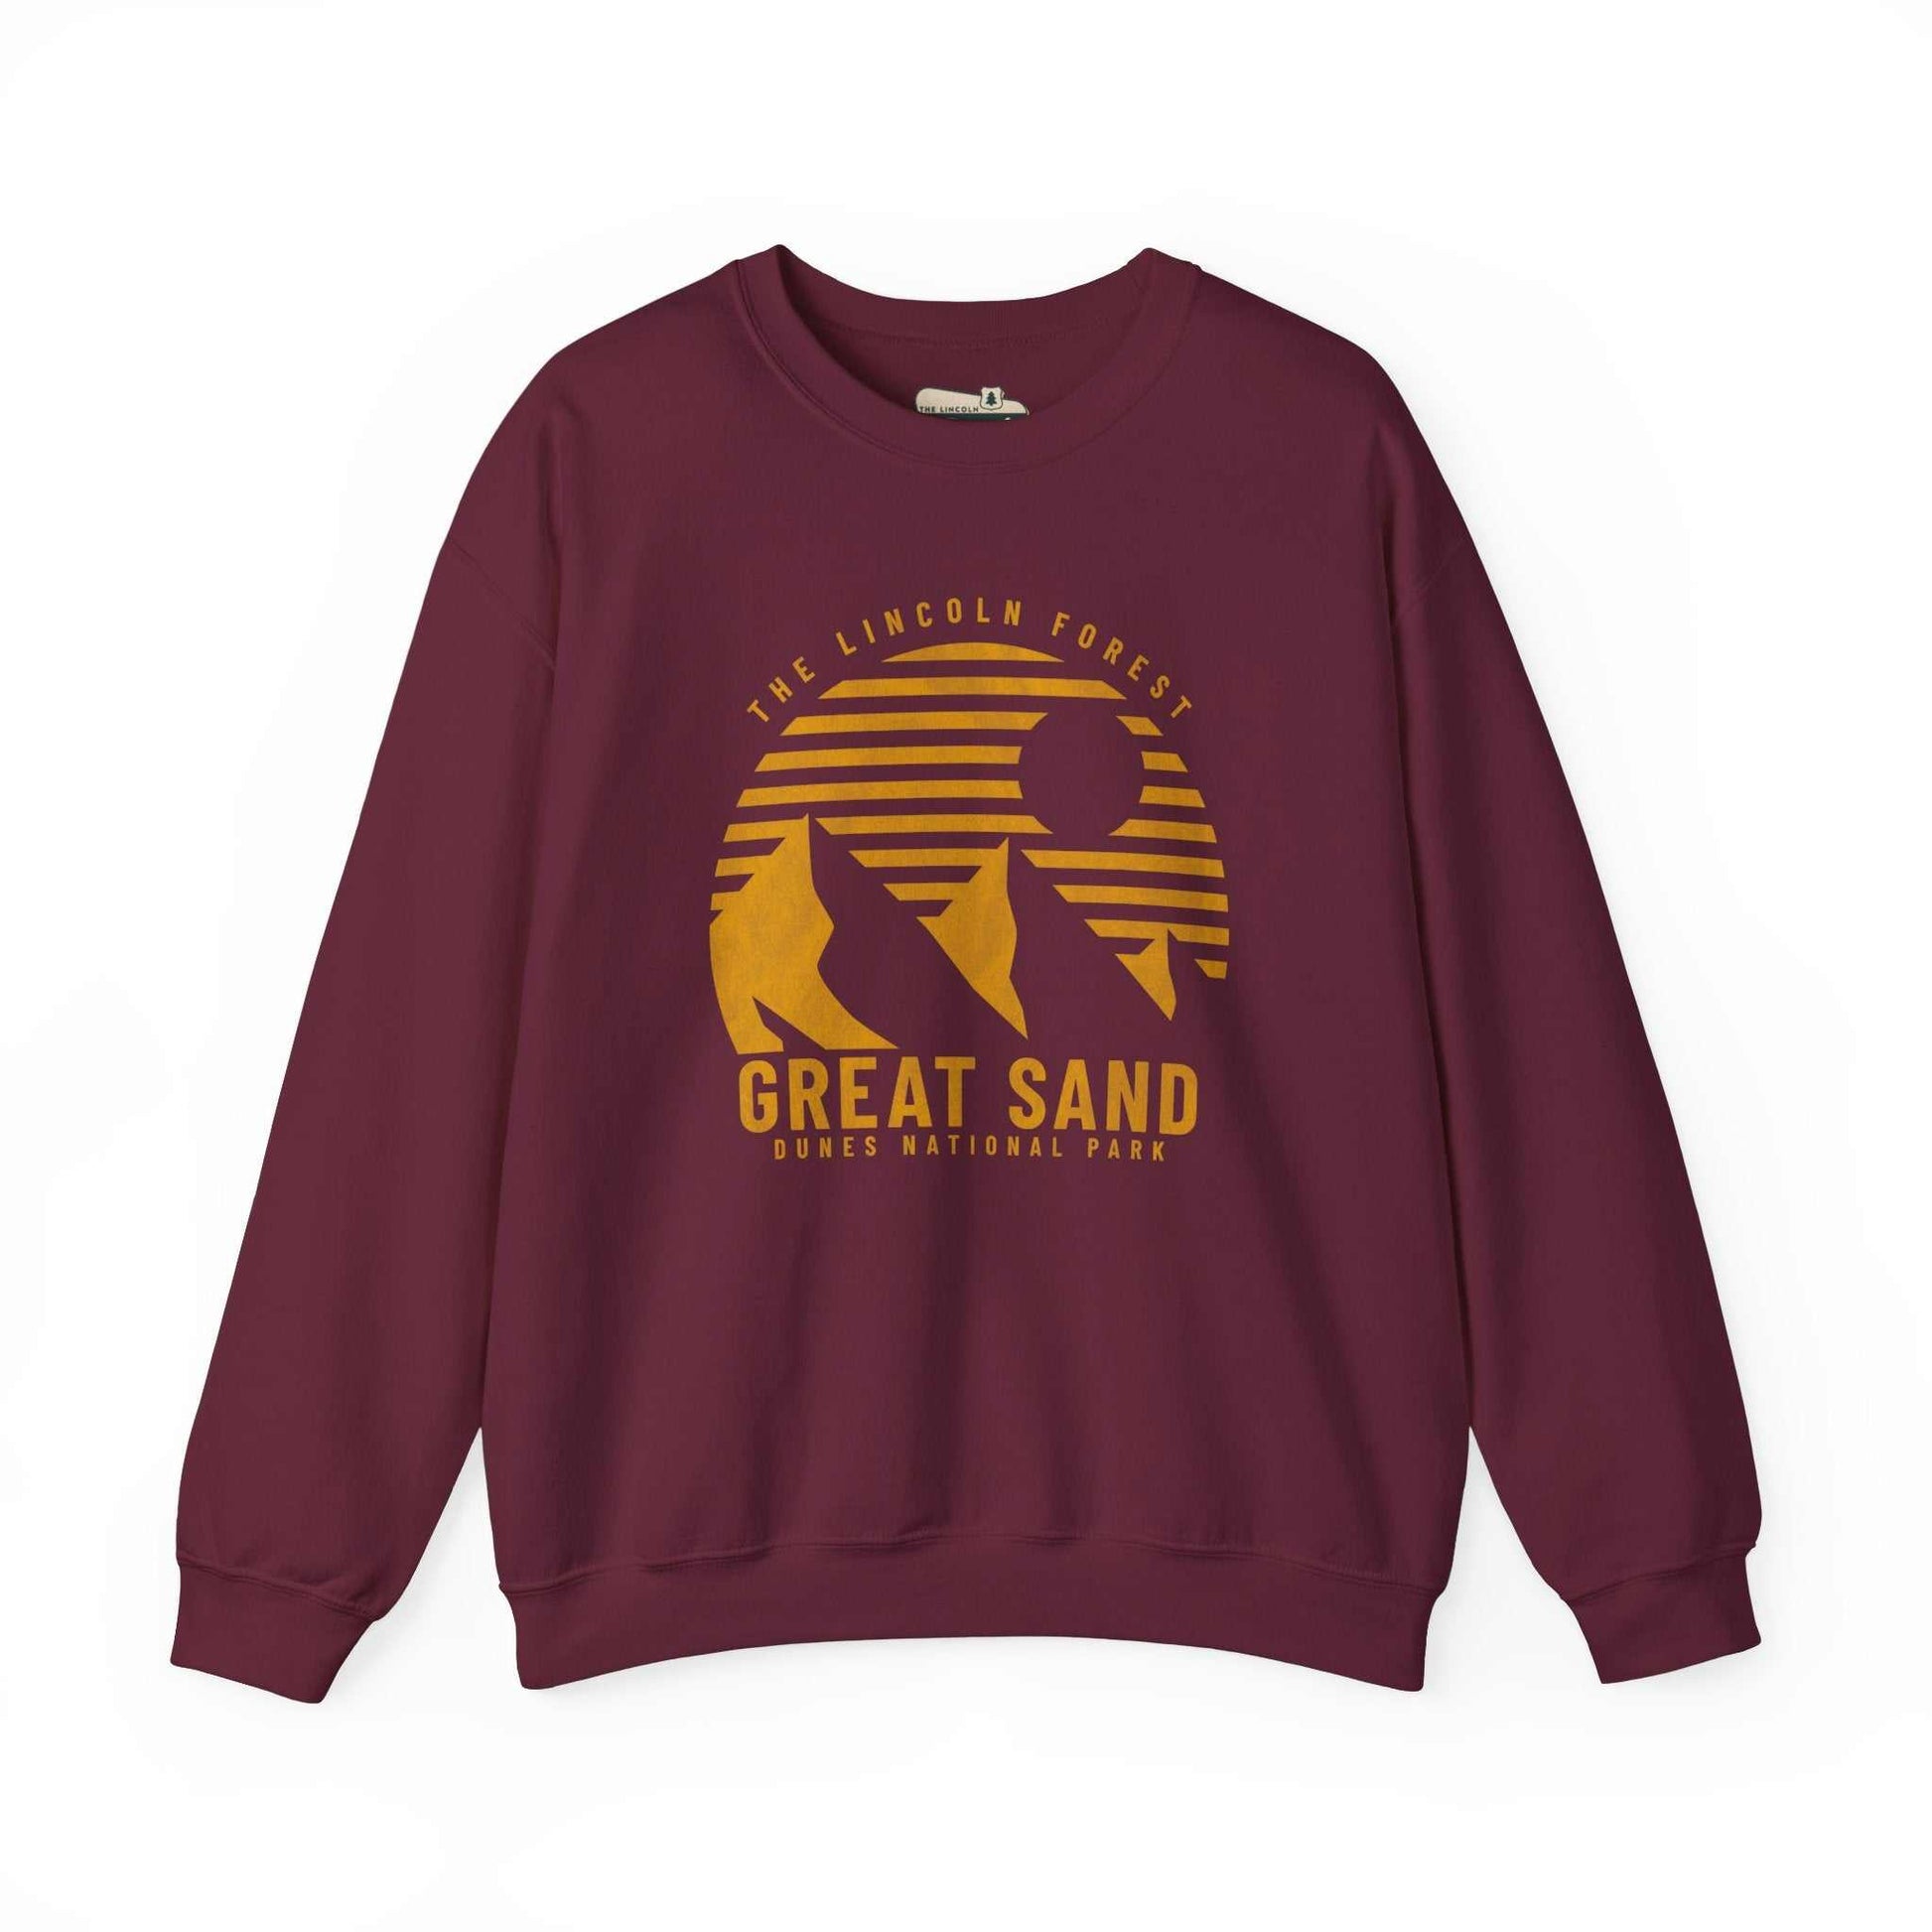 Great Sand Dunes National Park CrewneckDetails:
- ultra soft inside - unisex sizing
The Lincoln Forest cares deeply about the planet and creating a business that gives back to nature. That’s why we’re thr